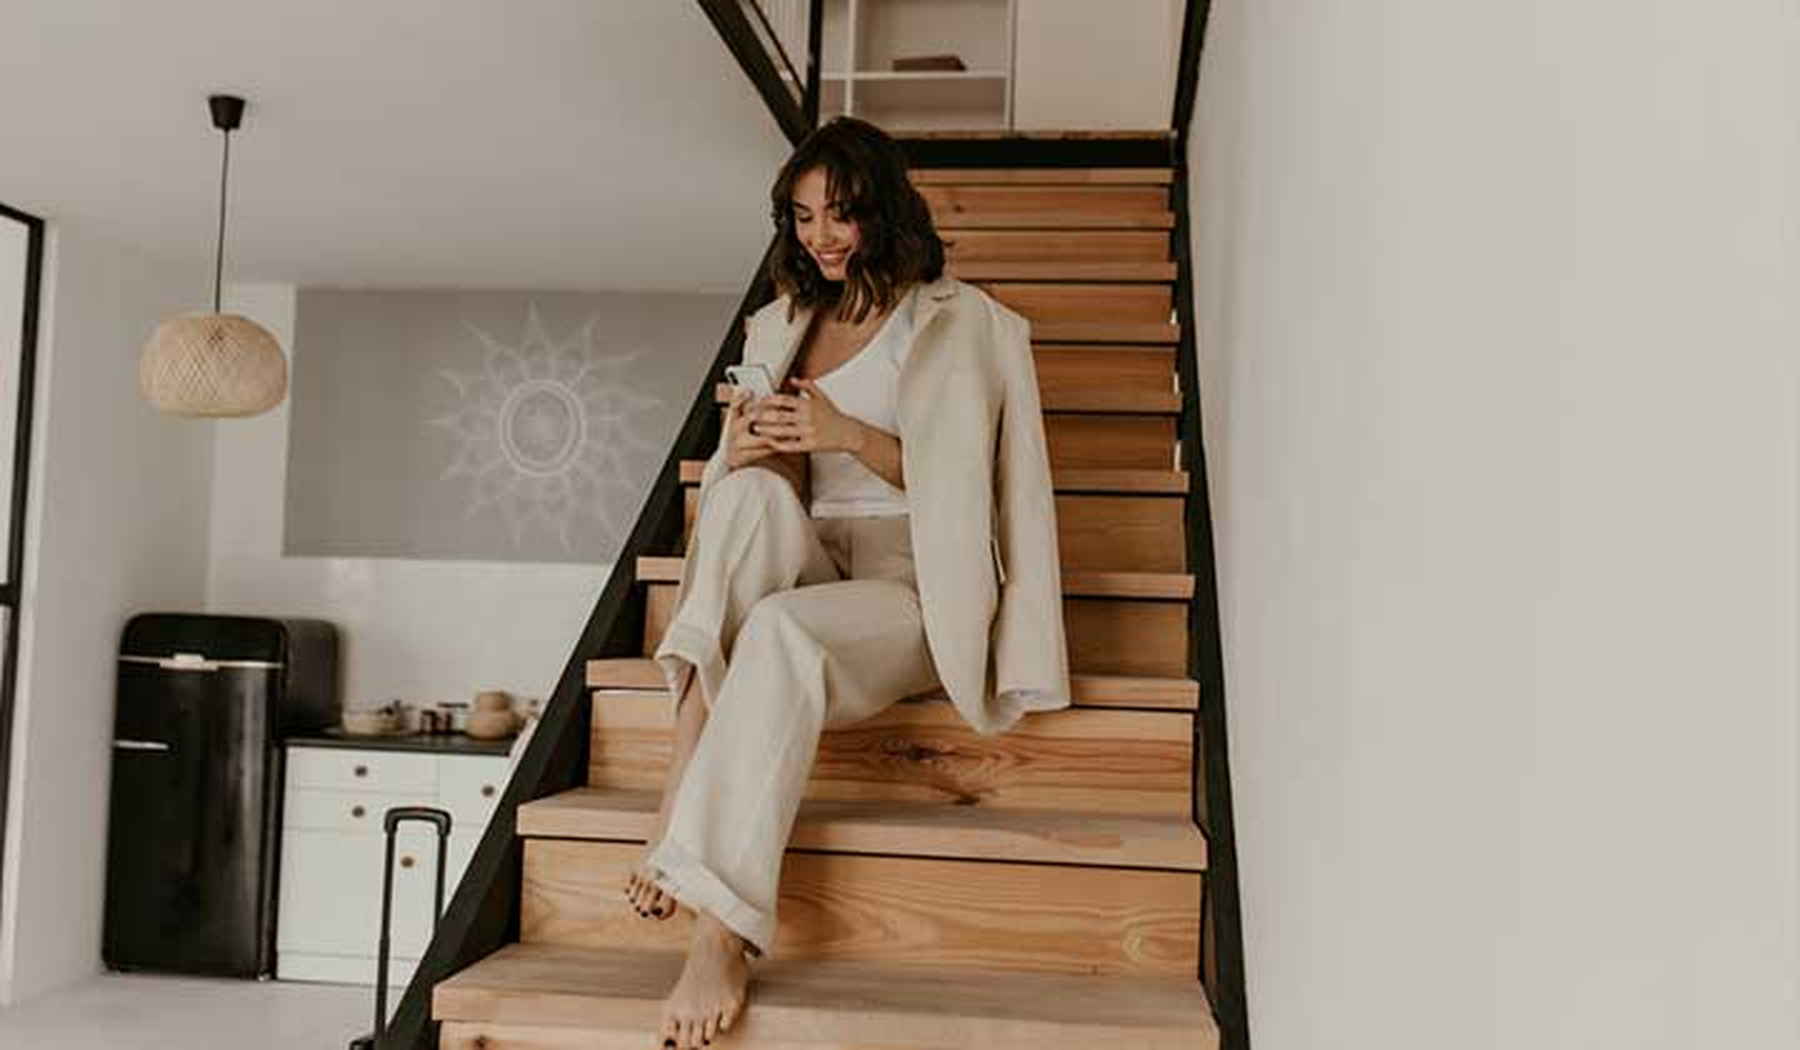 Young smiling woman wearing linen separates sitting on the stairs in her home